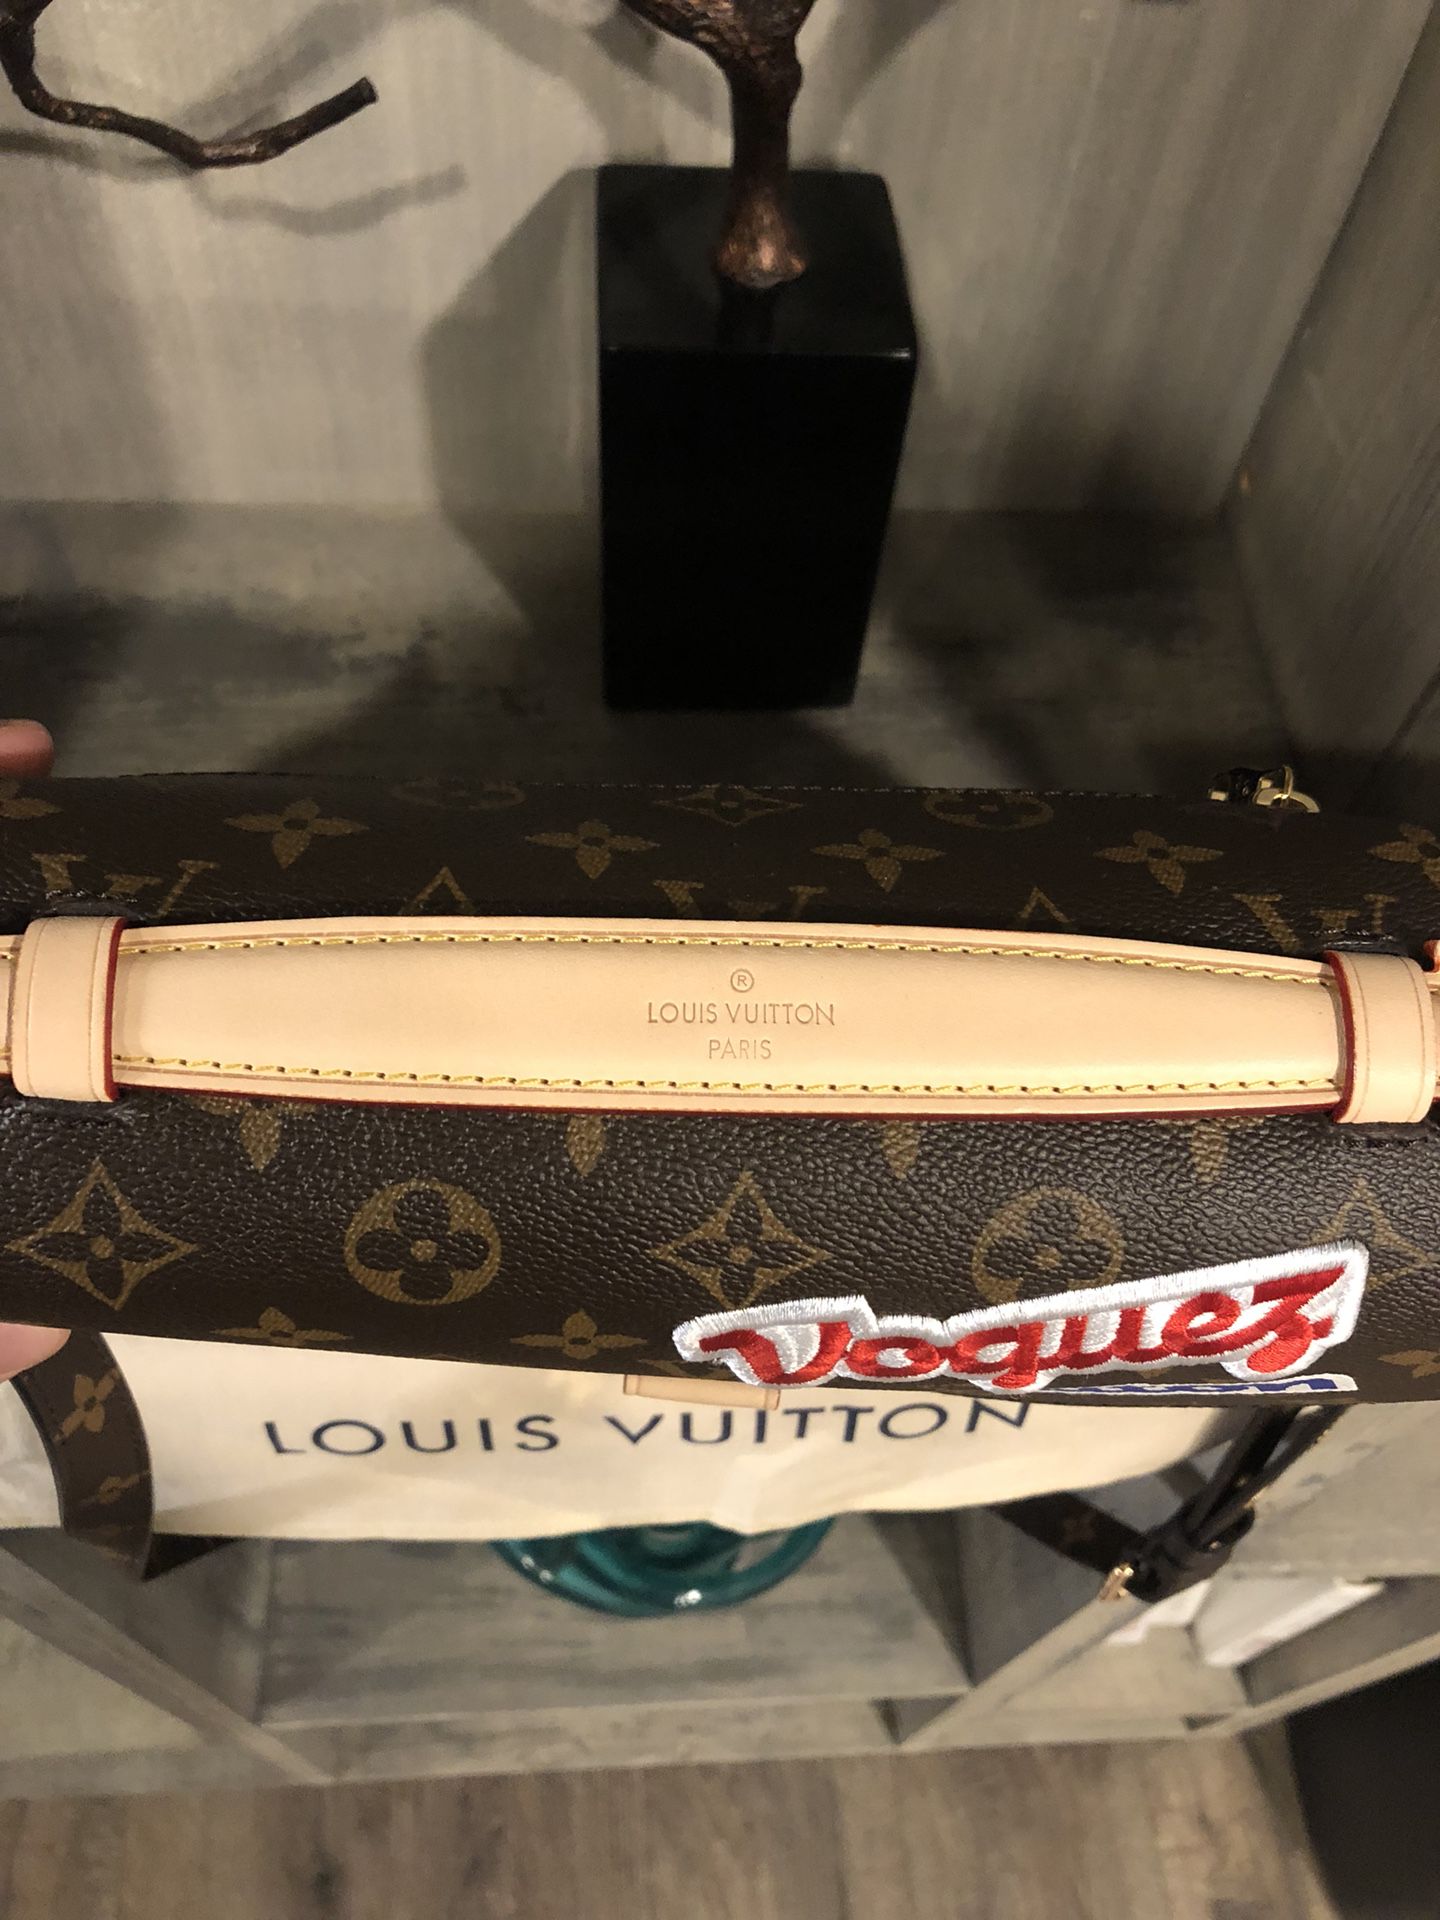 Authentic Lv Pochette Metis Bag Like New, Comes with dustbag, and receipt  for Sale in Bardonia, NY - OfferUp